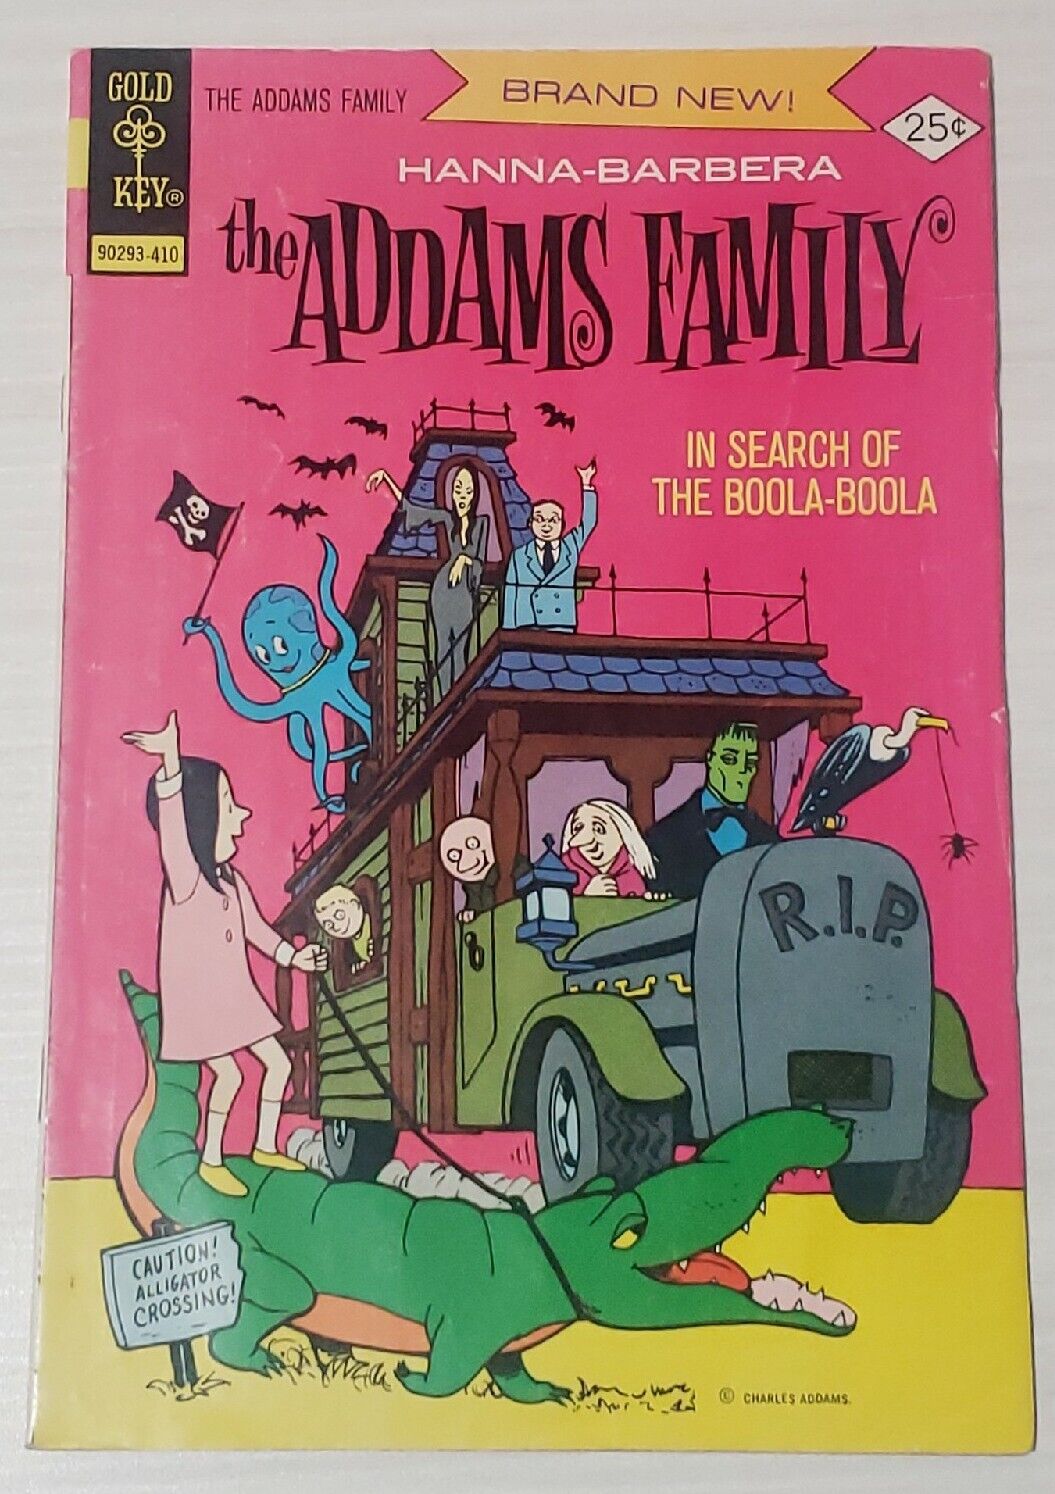 Addams Family #1 - Gold Key 1974 - In Search of the Boola-Boola Comic Book